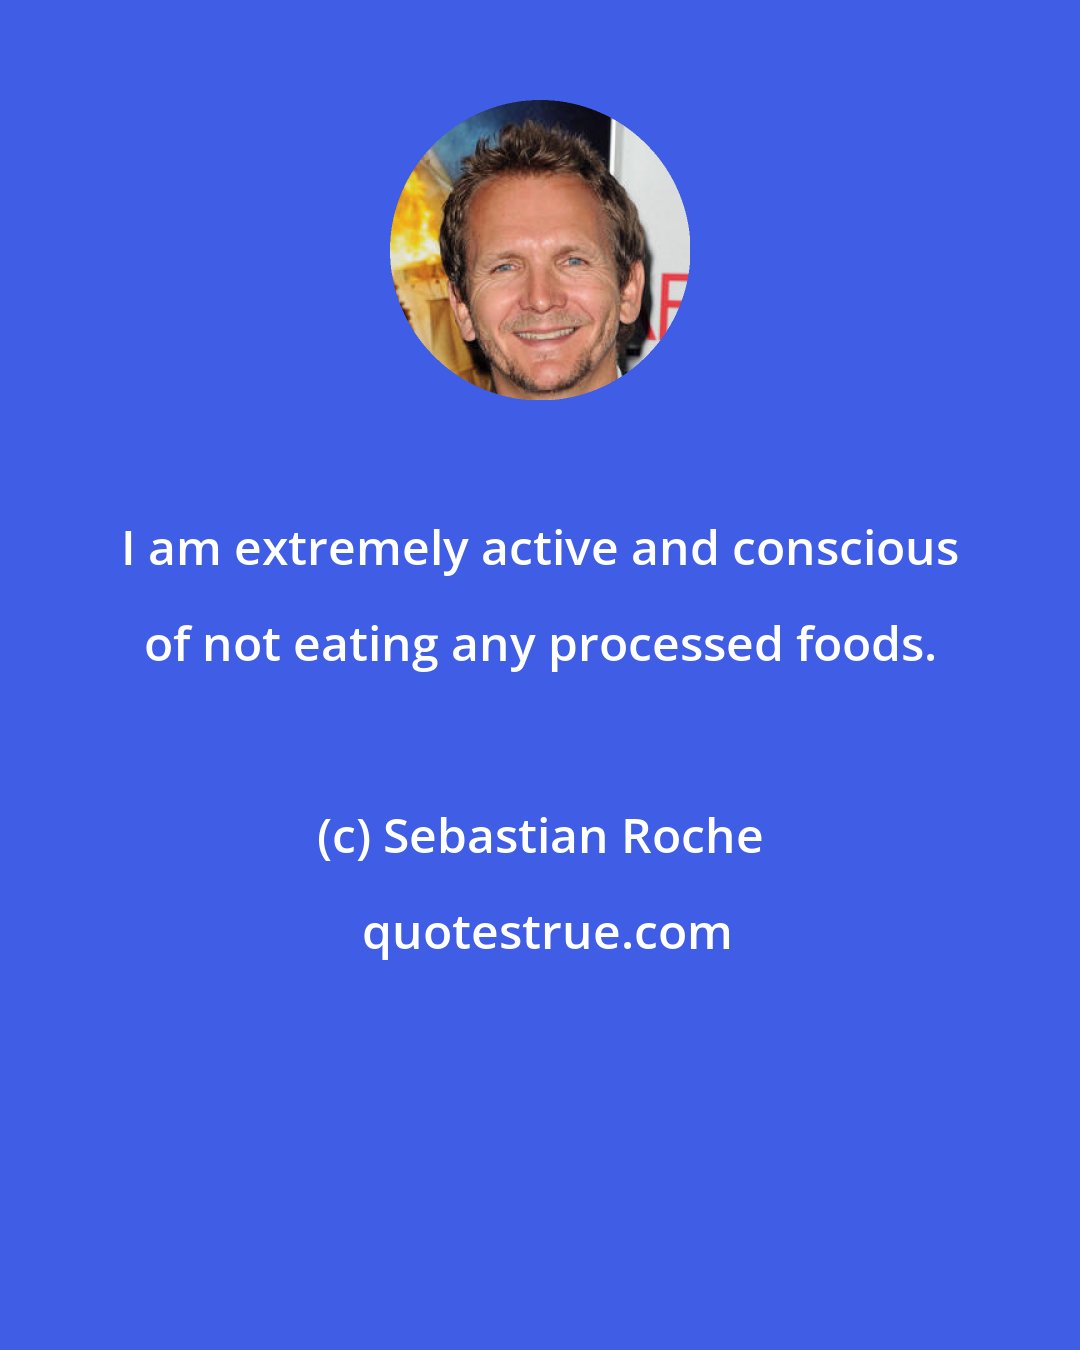 Sebastian Roche: I am extremely active and conscious of not eating any processed foods.